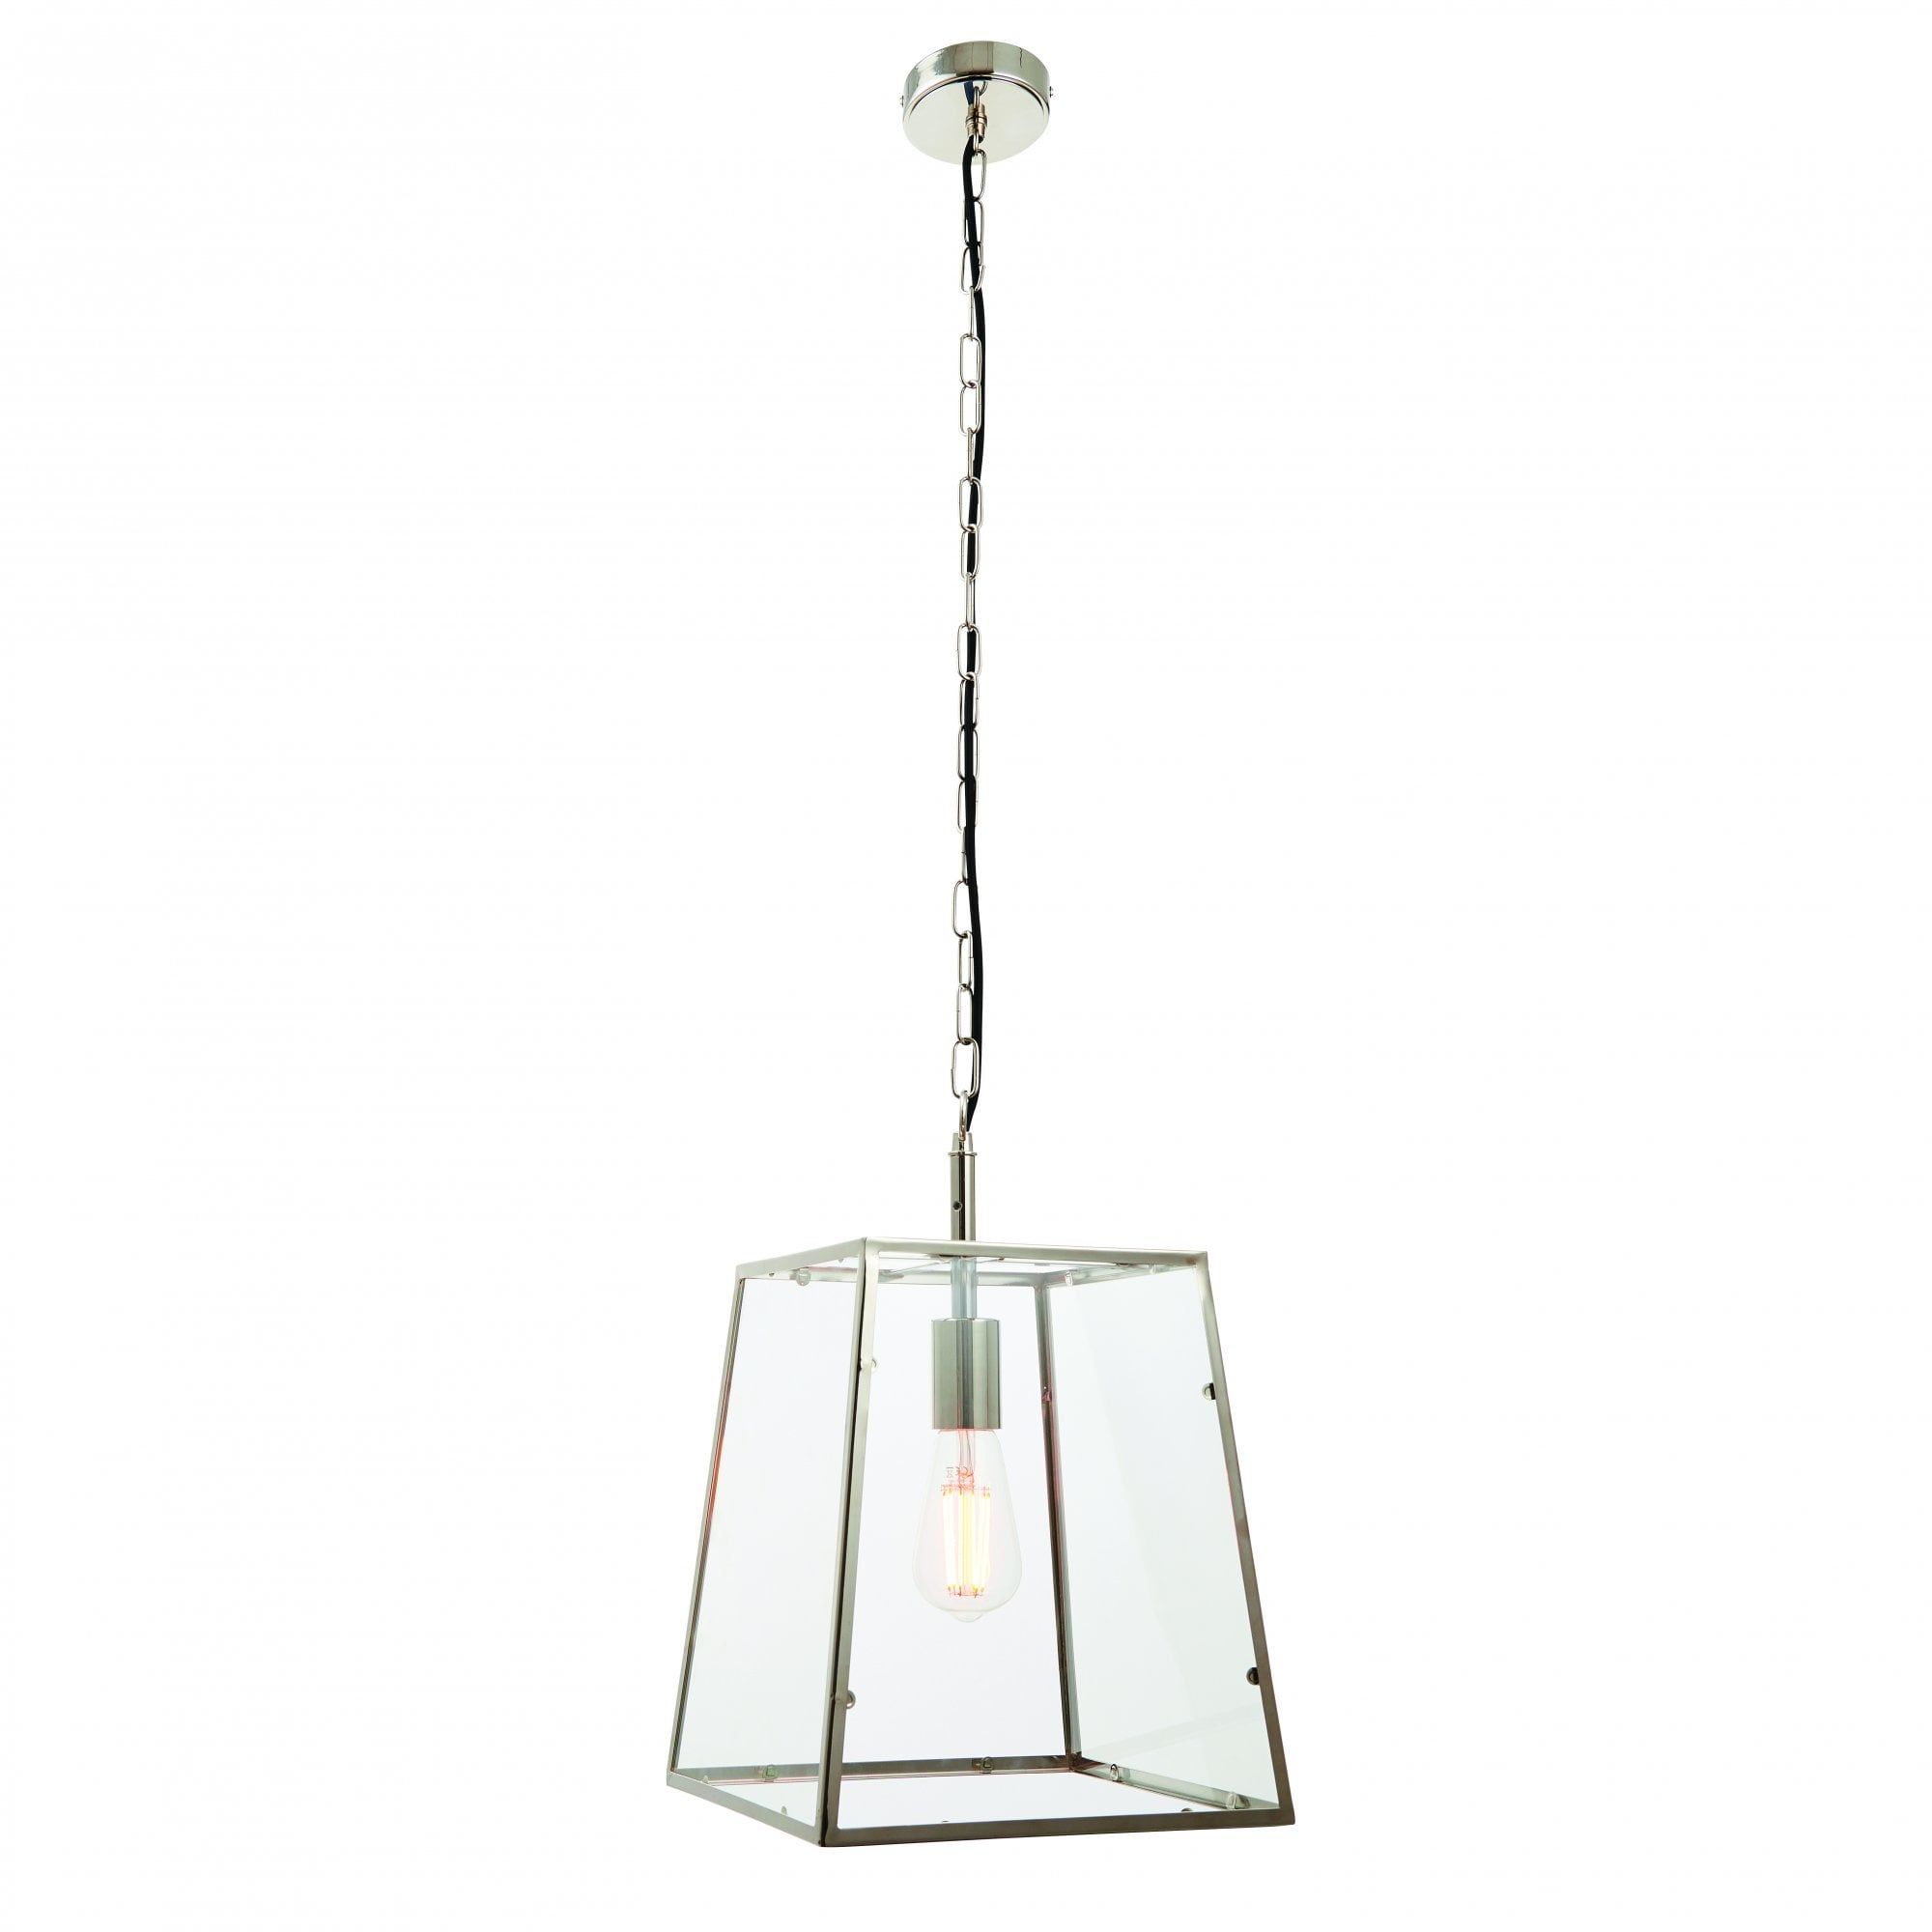 Ceiling Lantern In Polished Nickel With Clear Glass Intended For Lantern Chandeliers With Clear Glass (View 5 of 15)